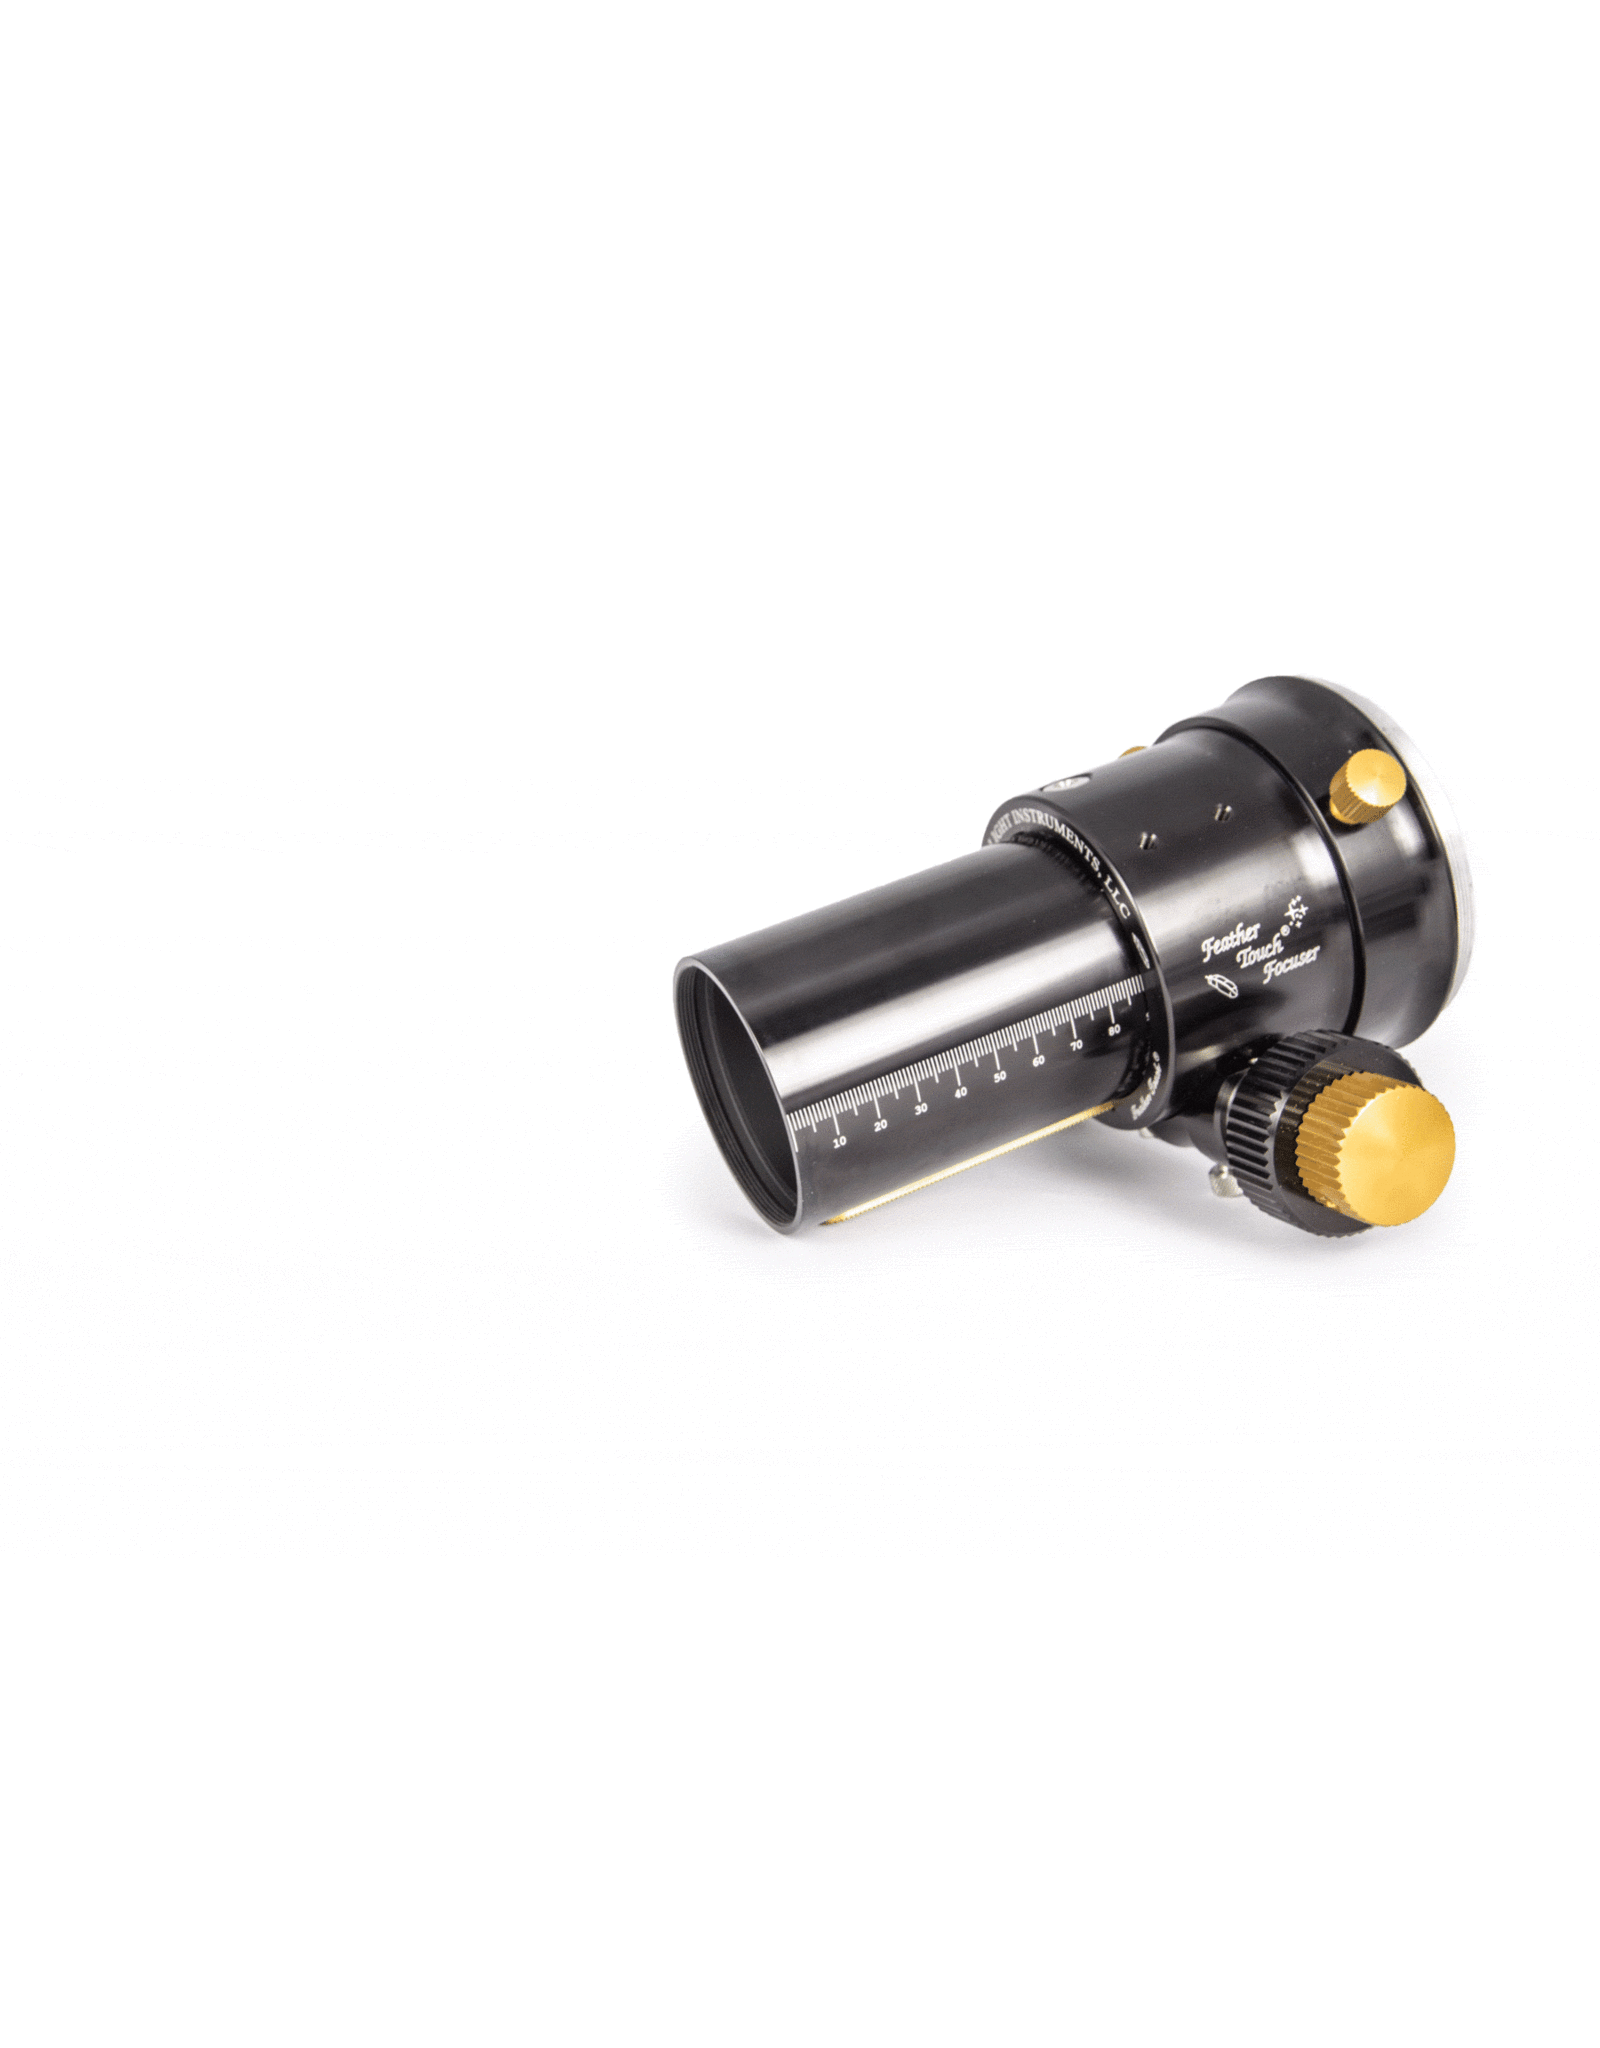 Baader Planetarium Baader Adapter M68i to M63a (Feathertouch 2.5", TS-Optics)